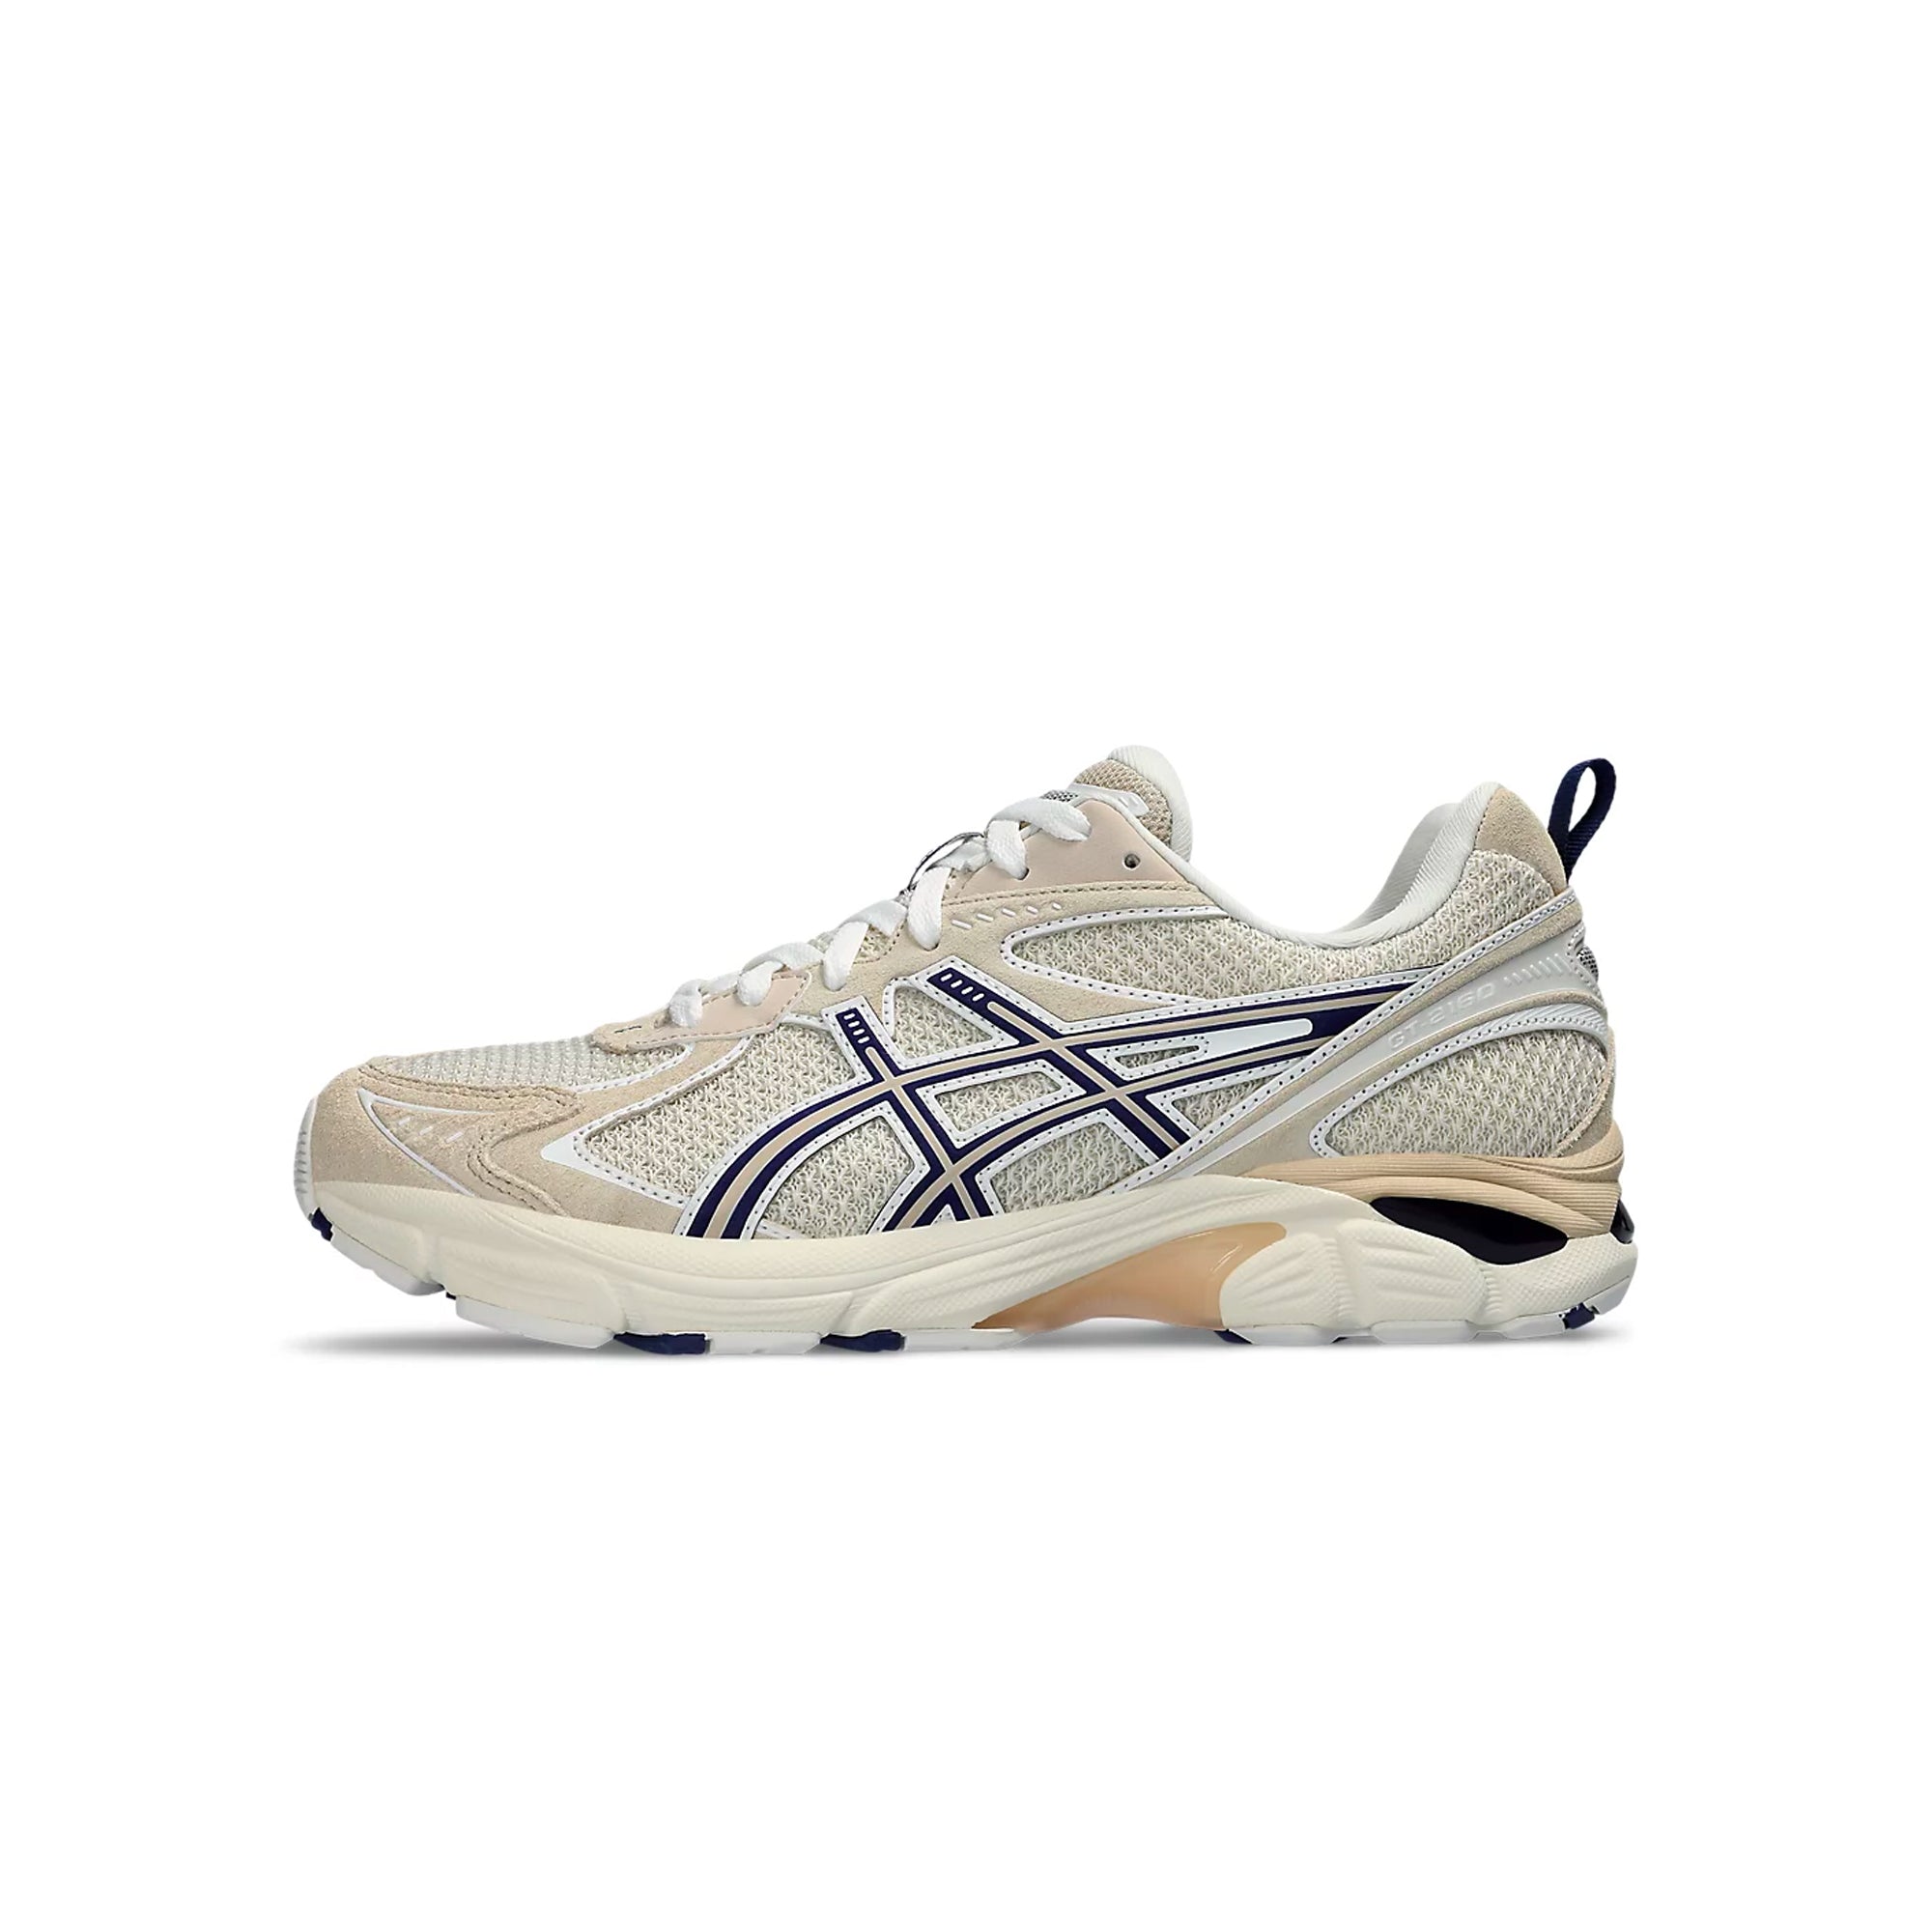 Asics x COSTS GT-2160 Shoes card image